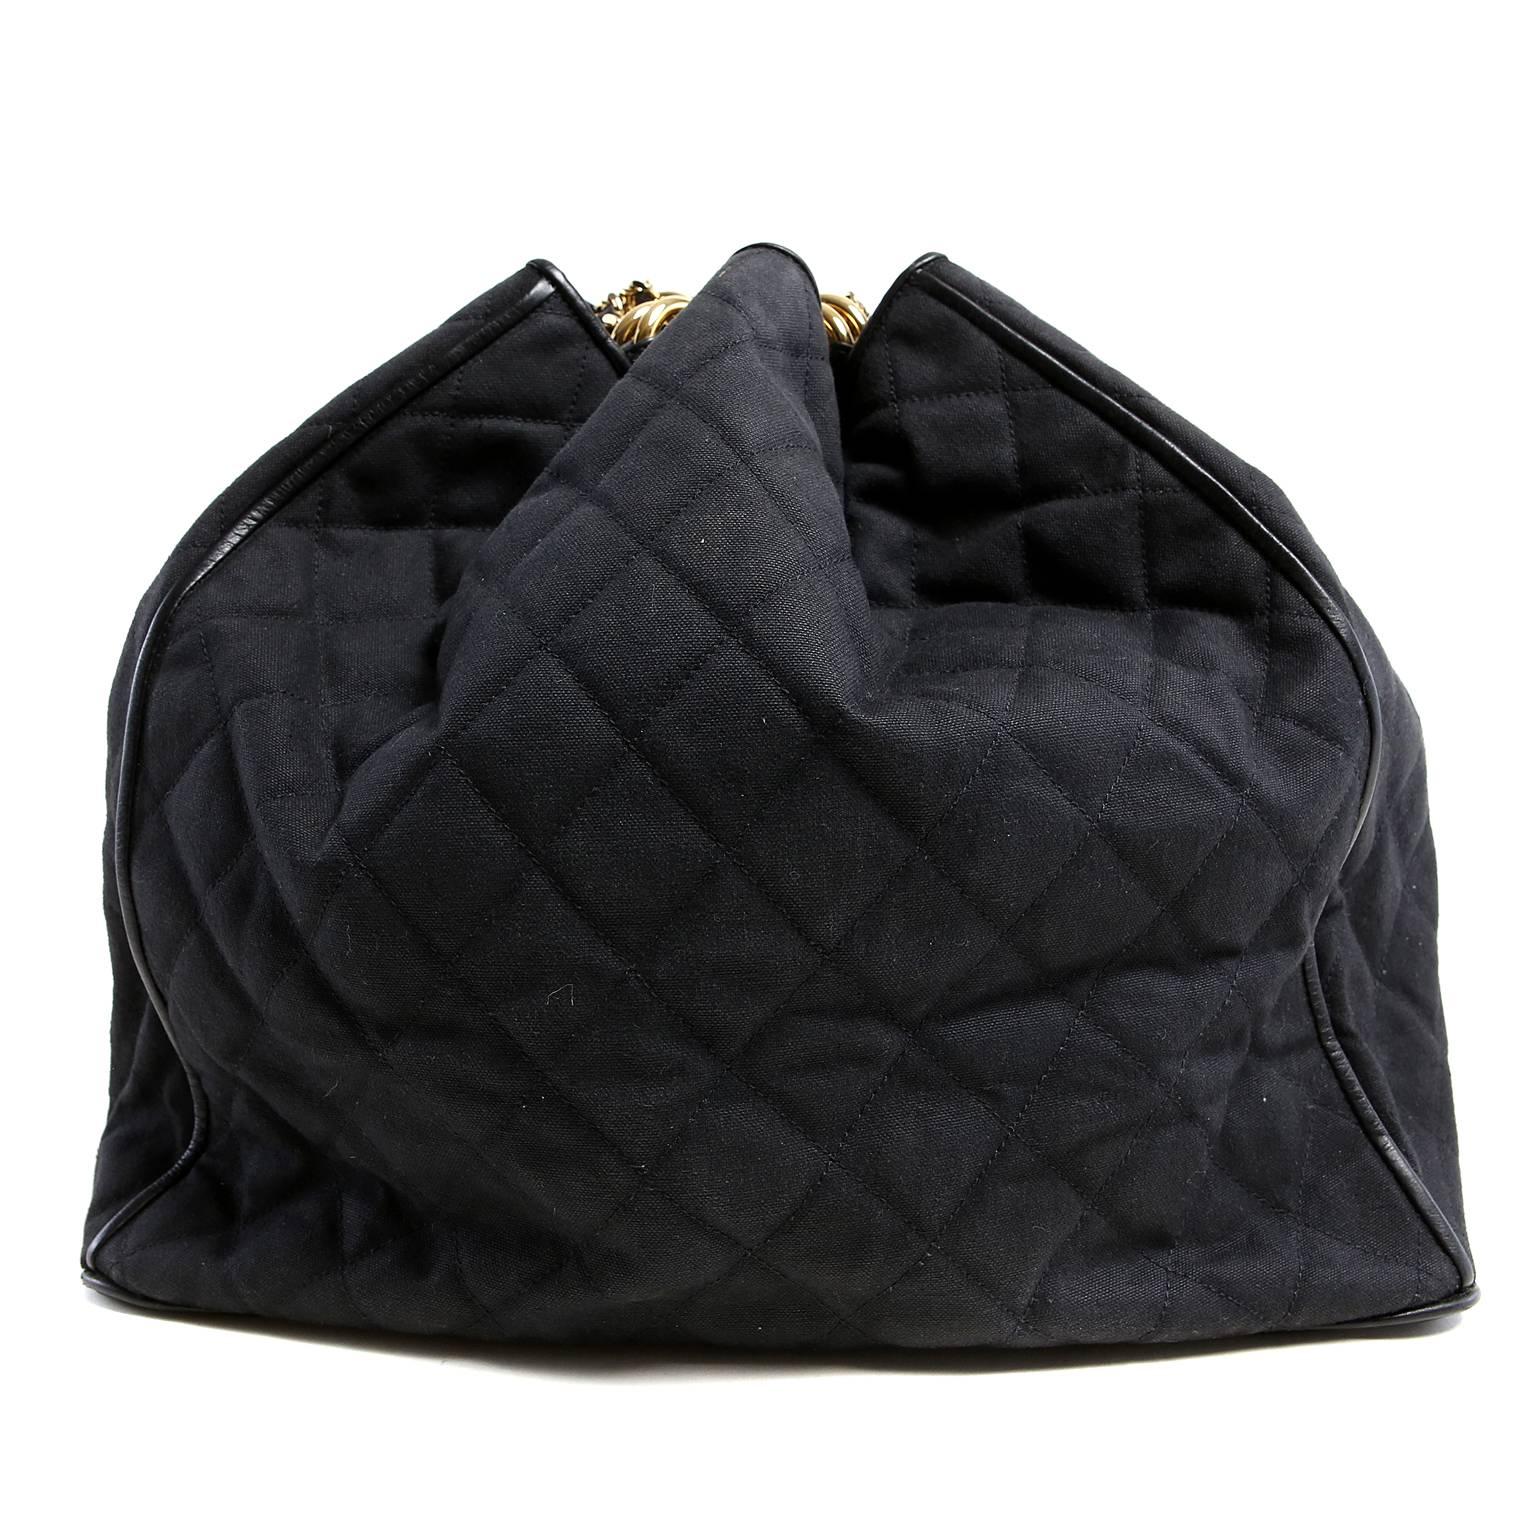 Chanel Black Quilted Canvas Drawstring Bucket Bag- EXCELLENT PLUS
The extra-long shoulder strap allows for shoulder or cross body wear.
 
 Black fabric bucket bag is quilted in signature Chanel diamond pattern.  Sturdy black leather bottom,